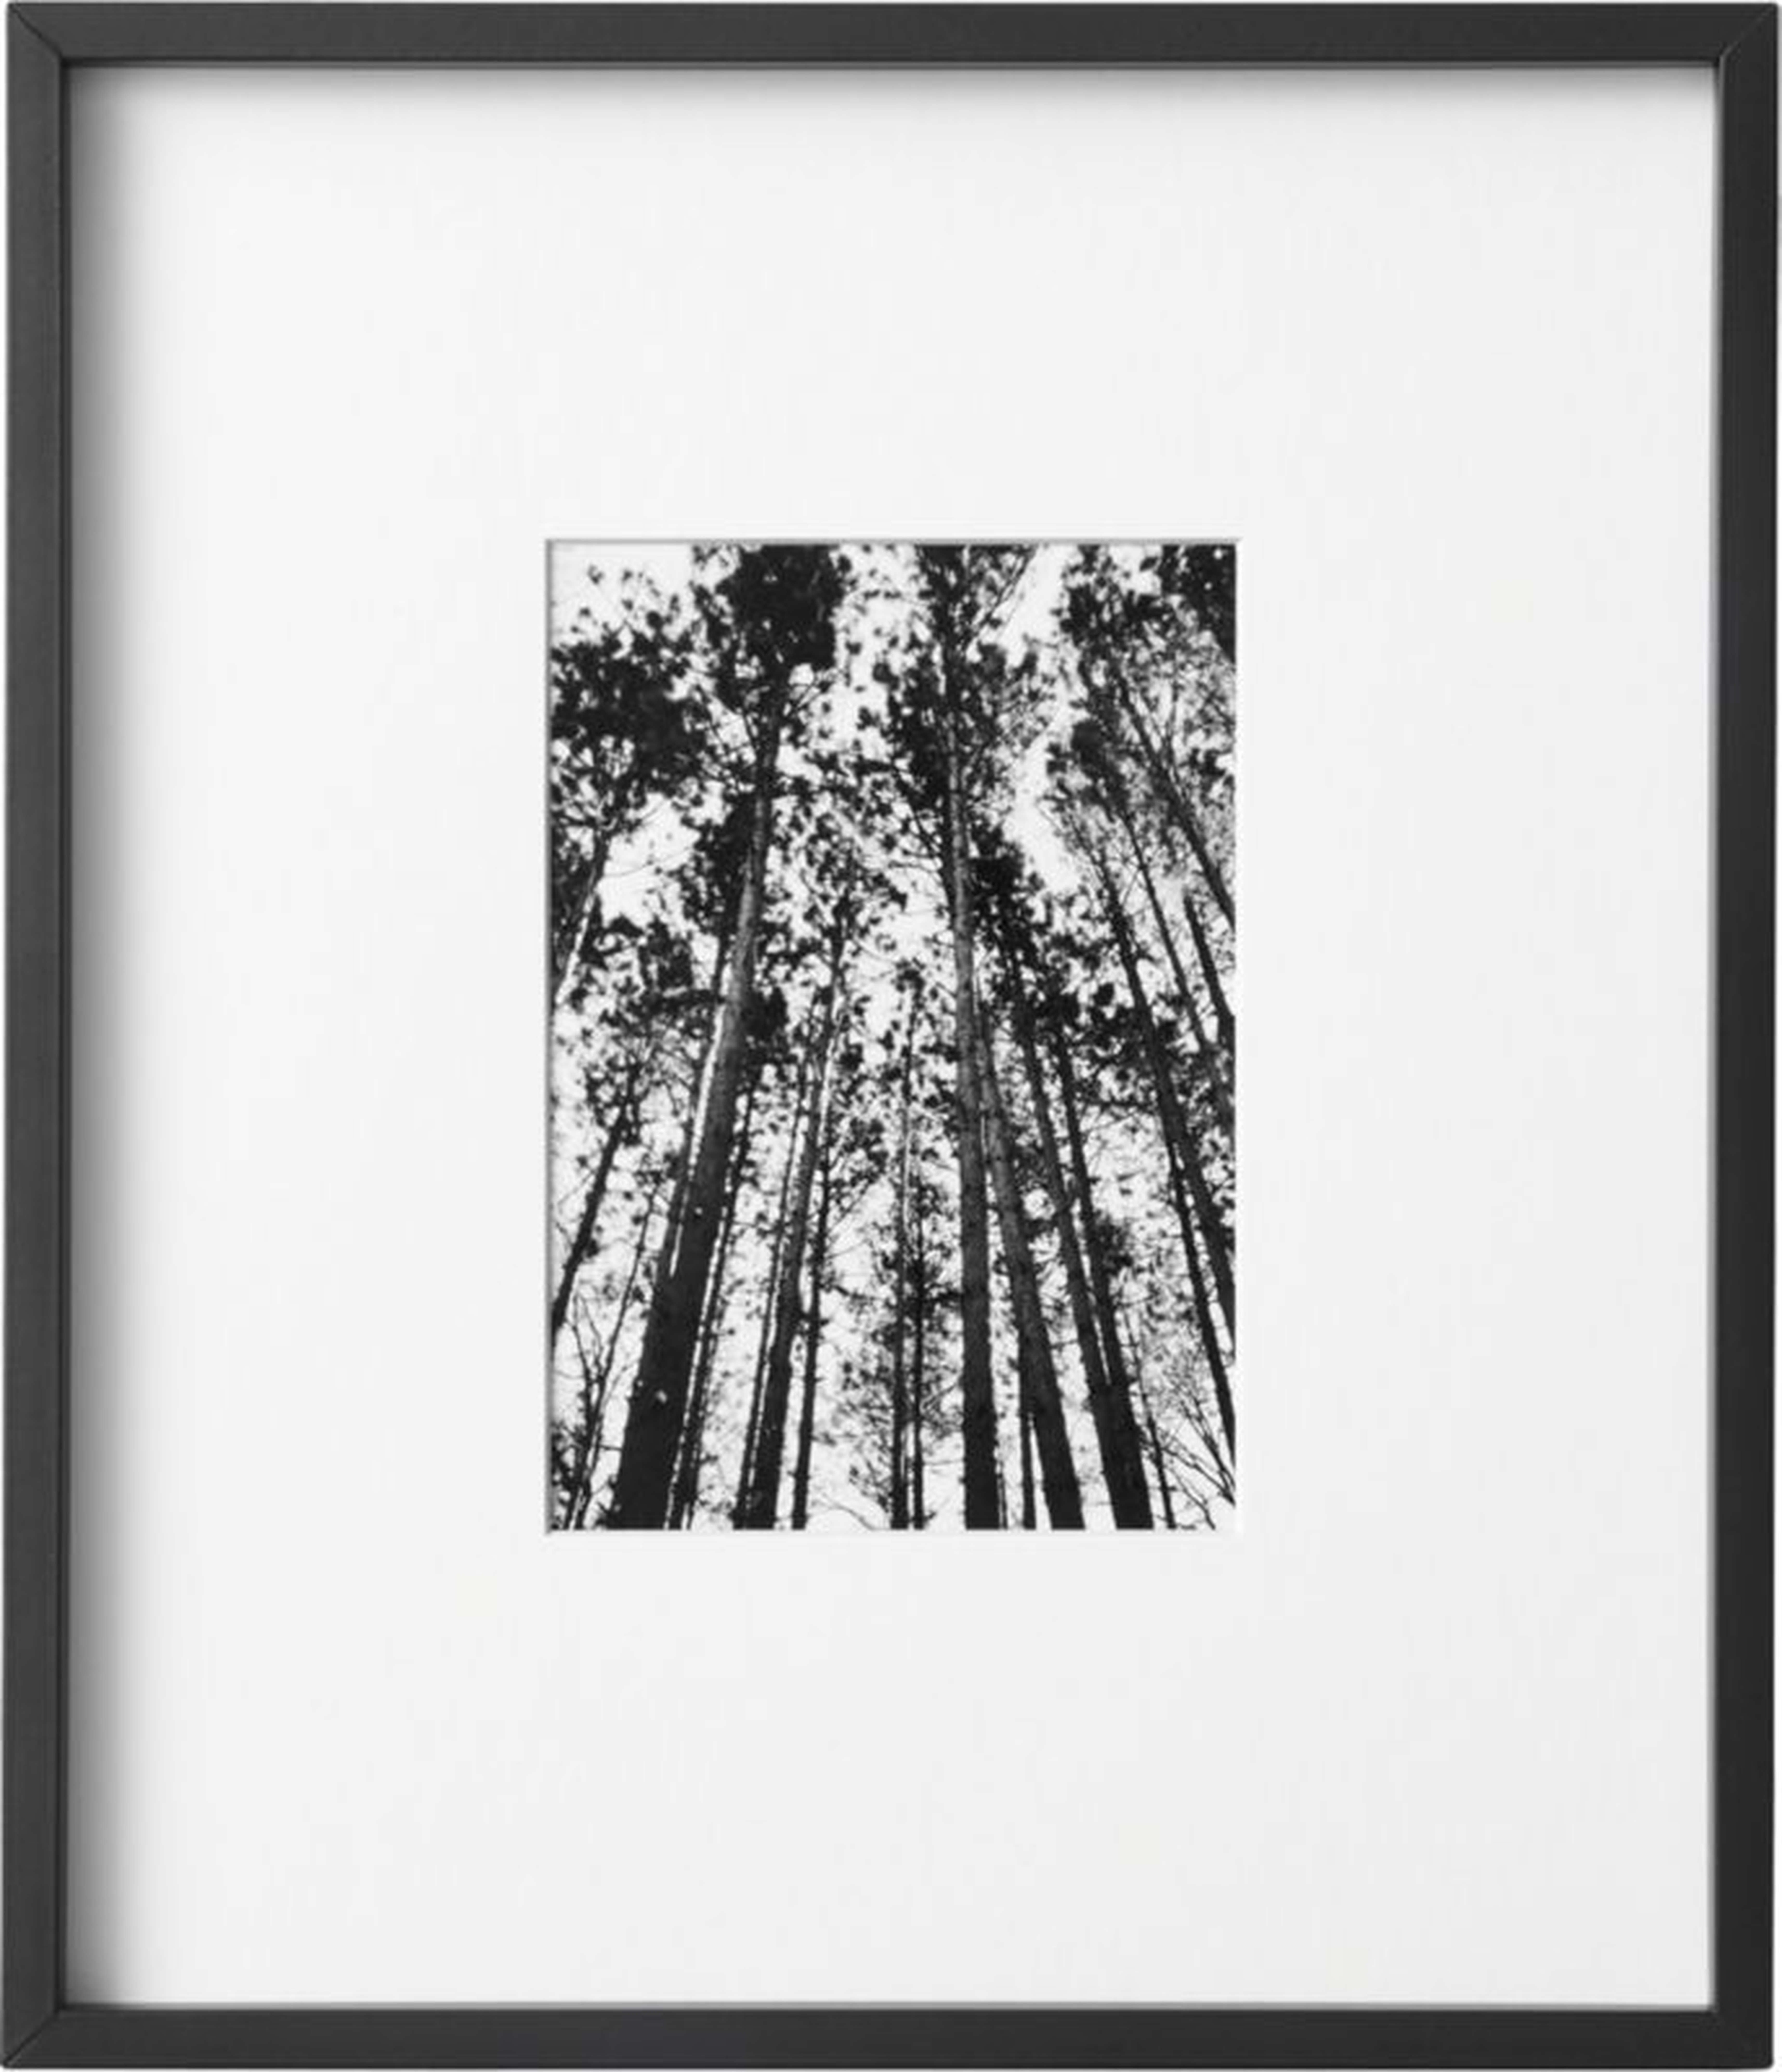 Gallery Black Frame with White Mat 5x7 - CB2